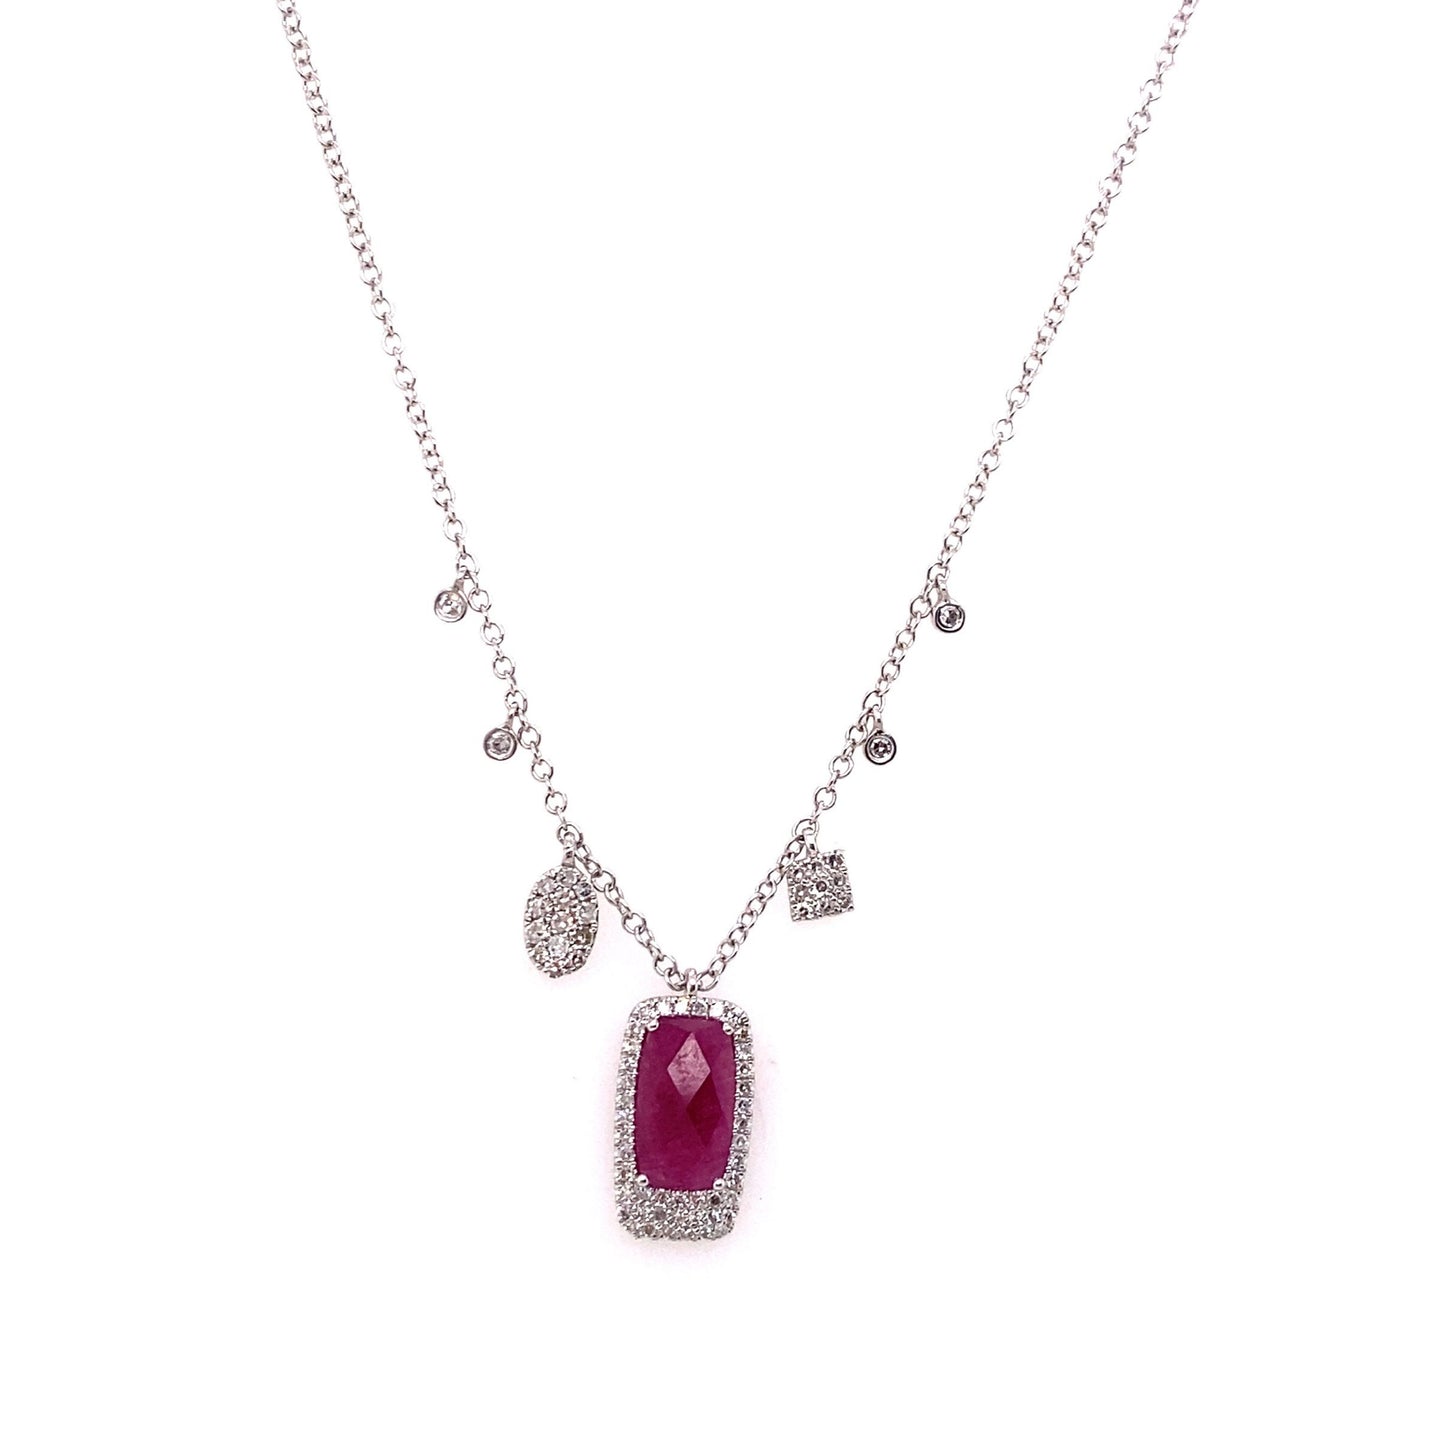 Meira T 14kt White Gold Rectangle Ruby and Diamond Charm Necklace